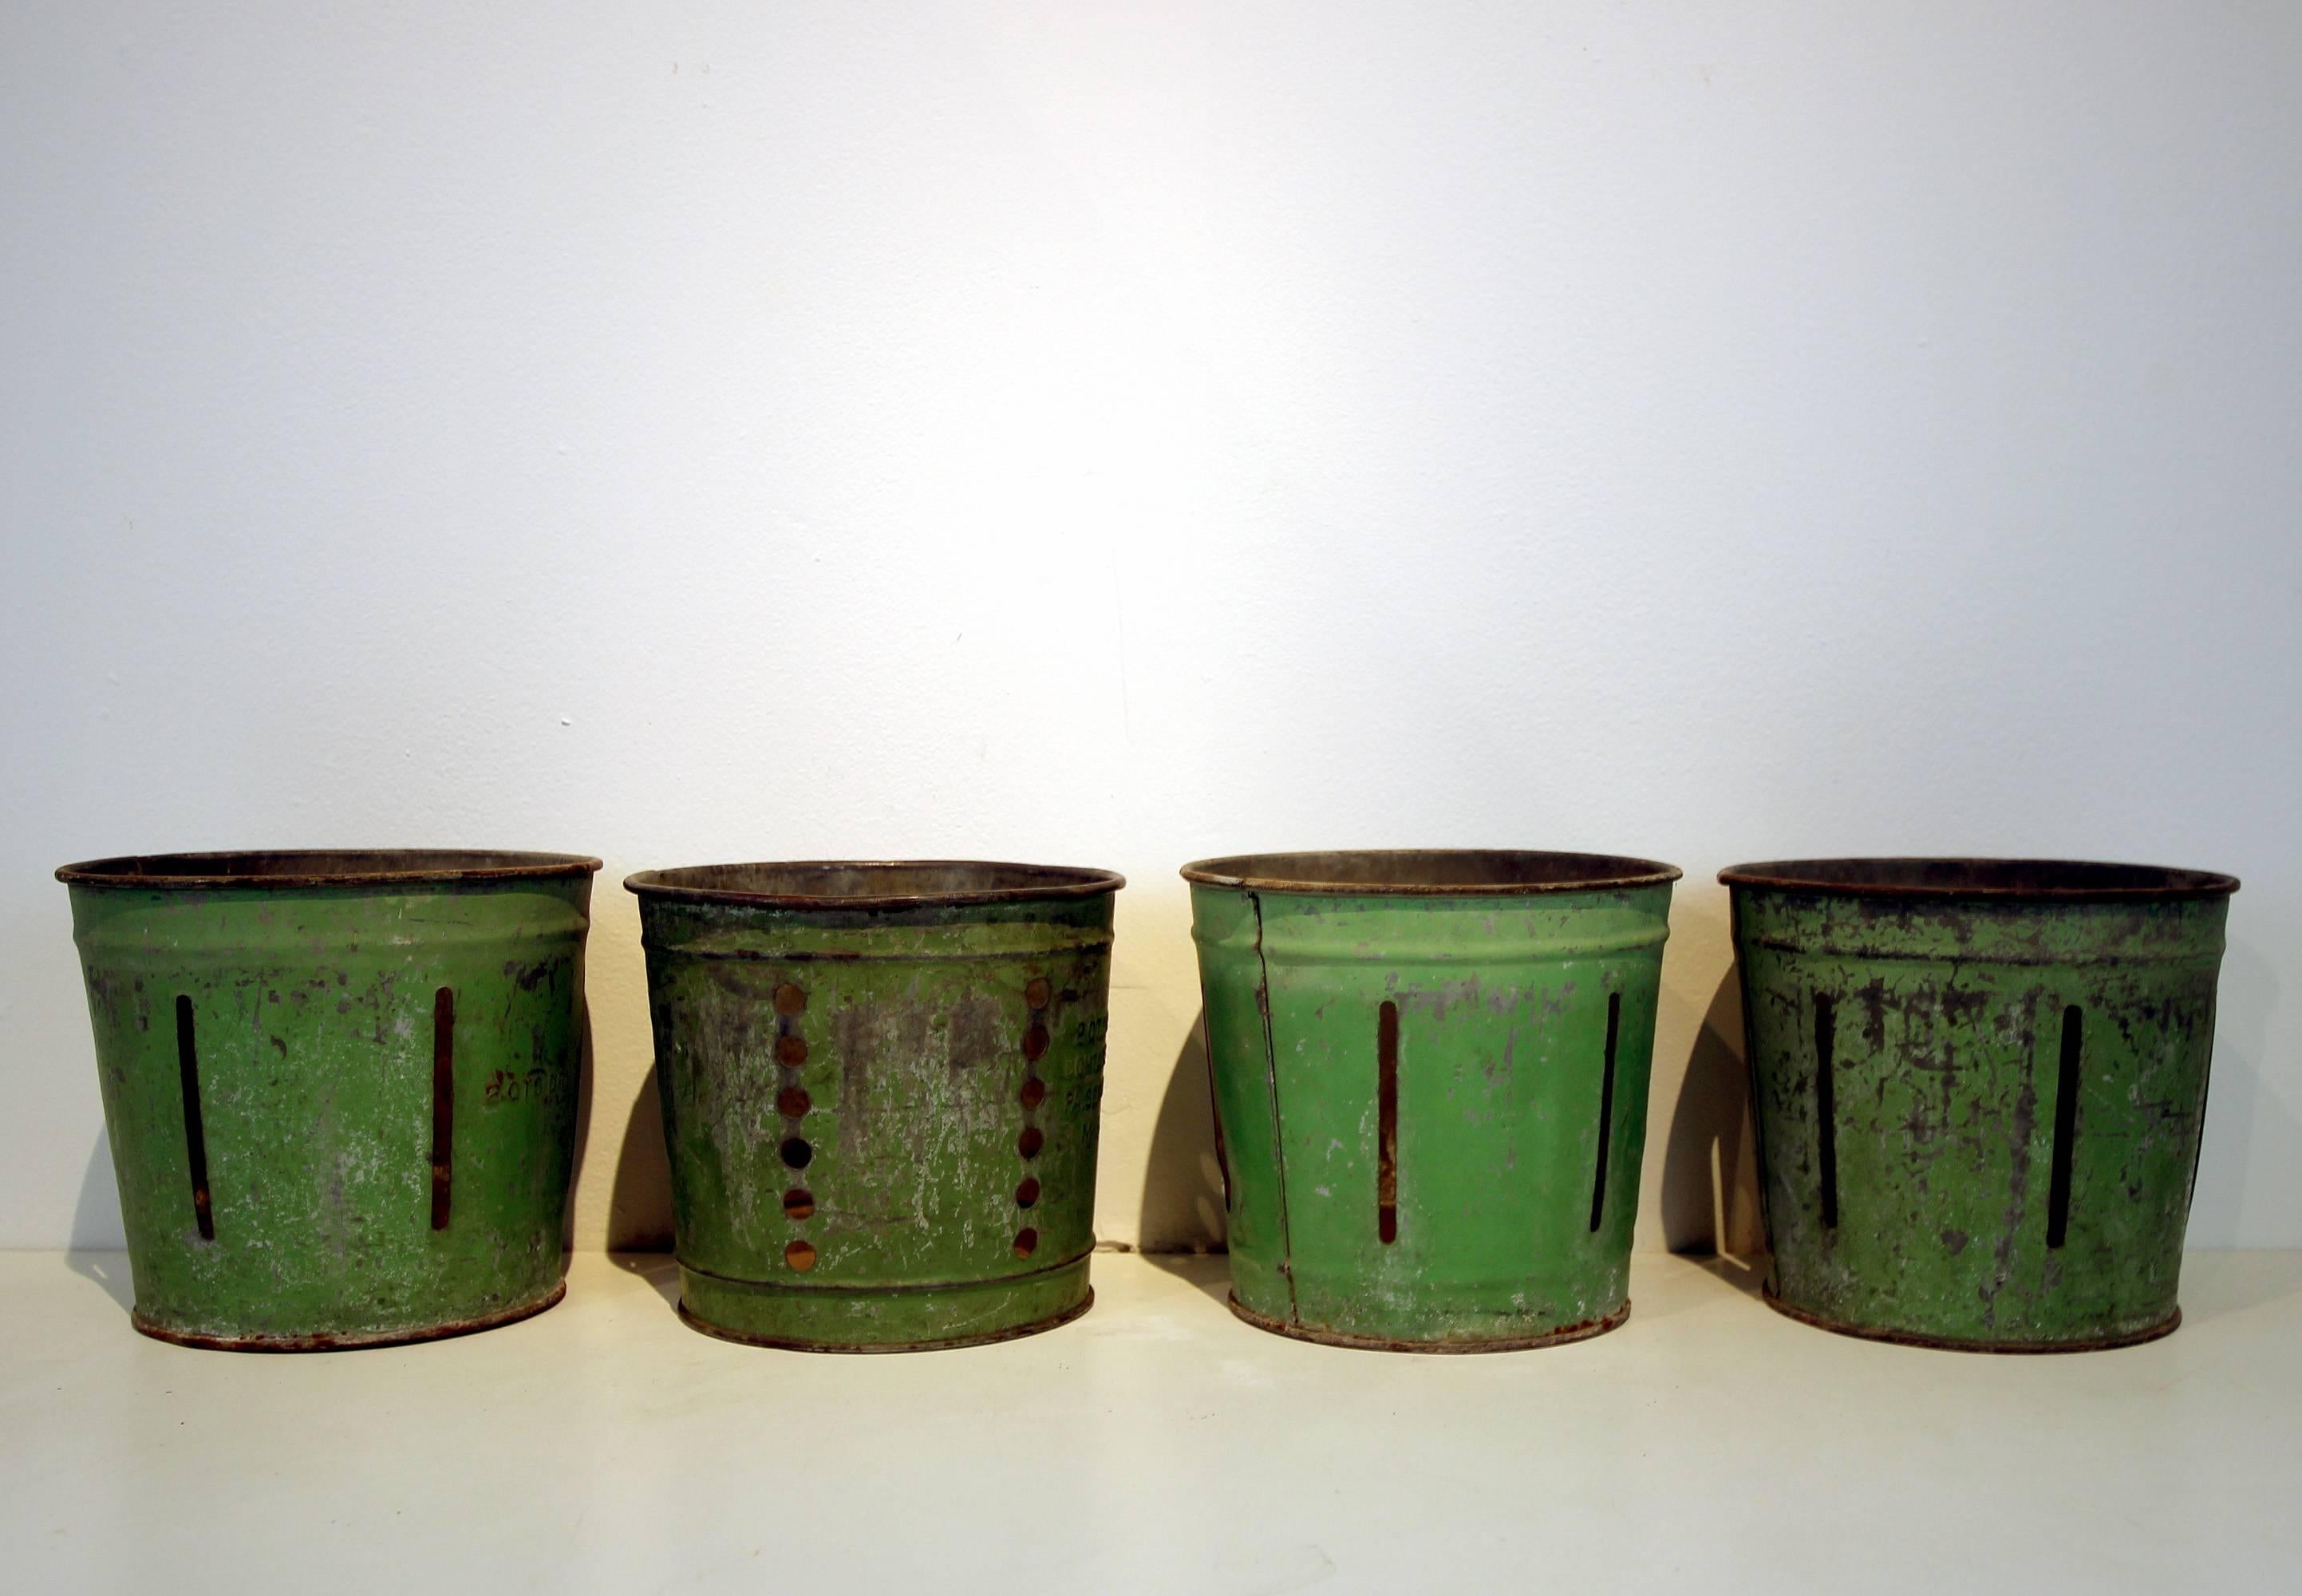 Industrial Set of four Green Painted Metal Bucket Measures For Sale